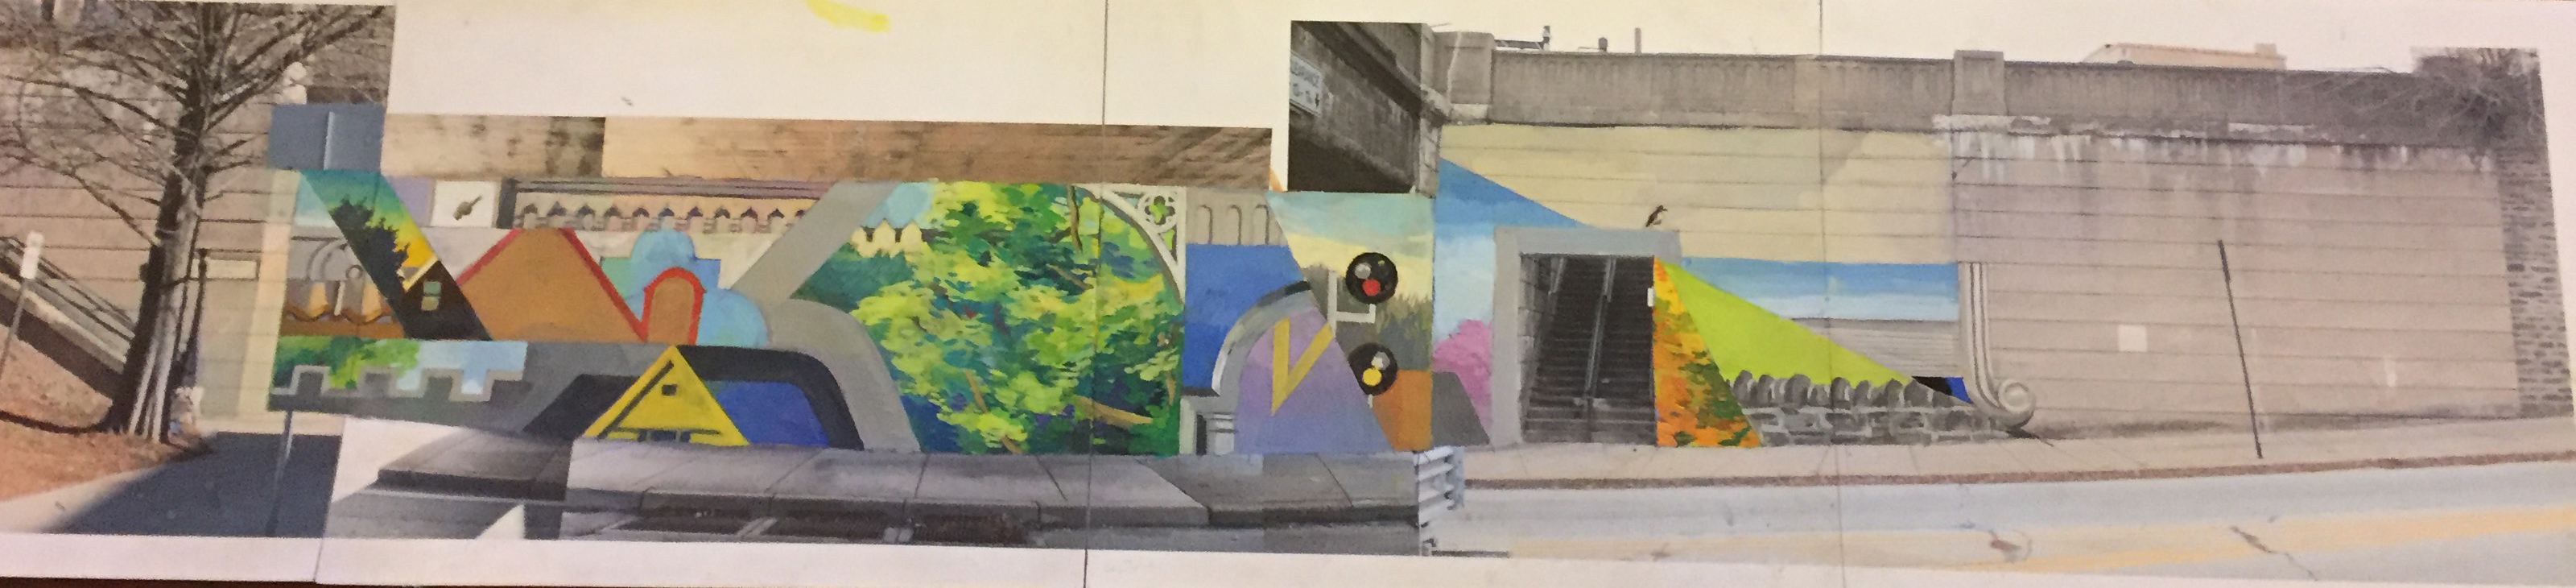 Proposed mural sketch by Arcadia students.